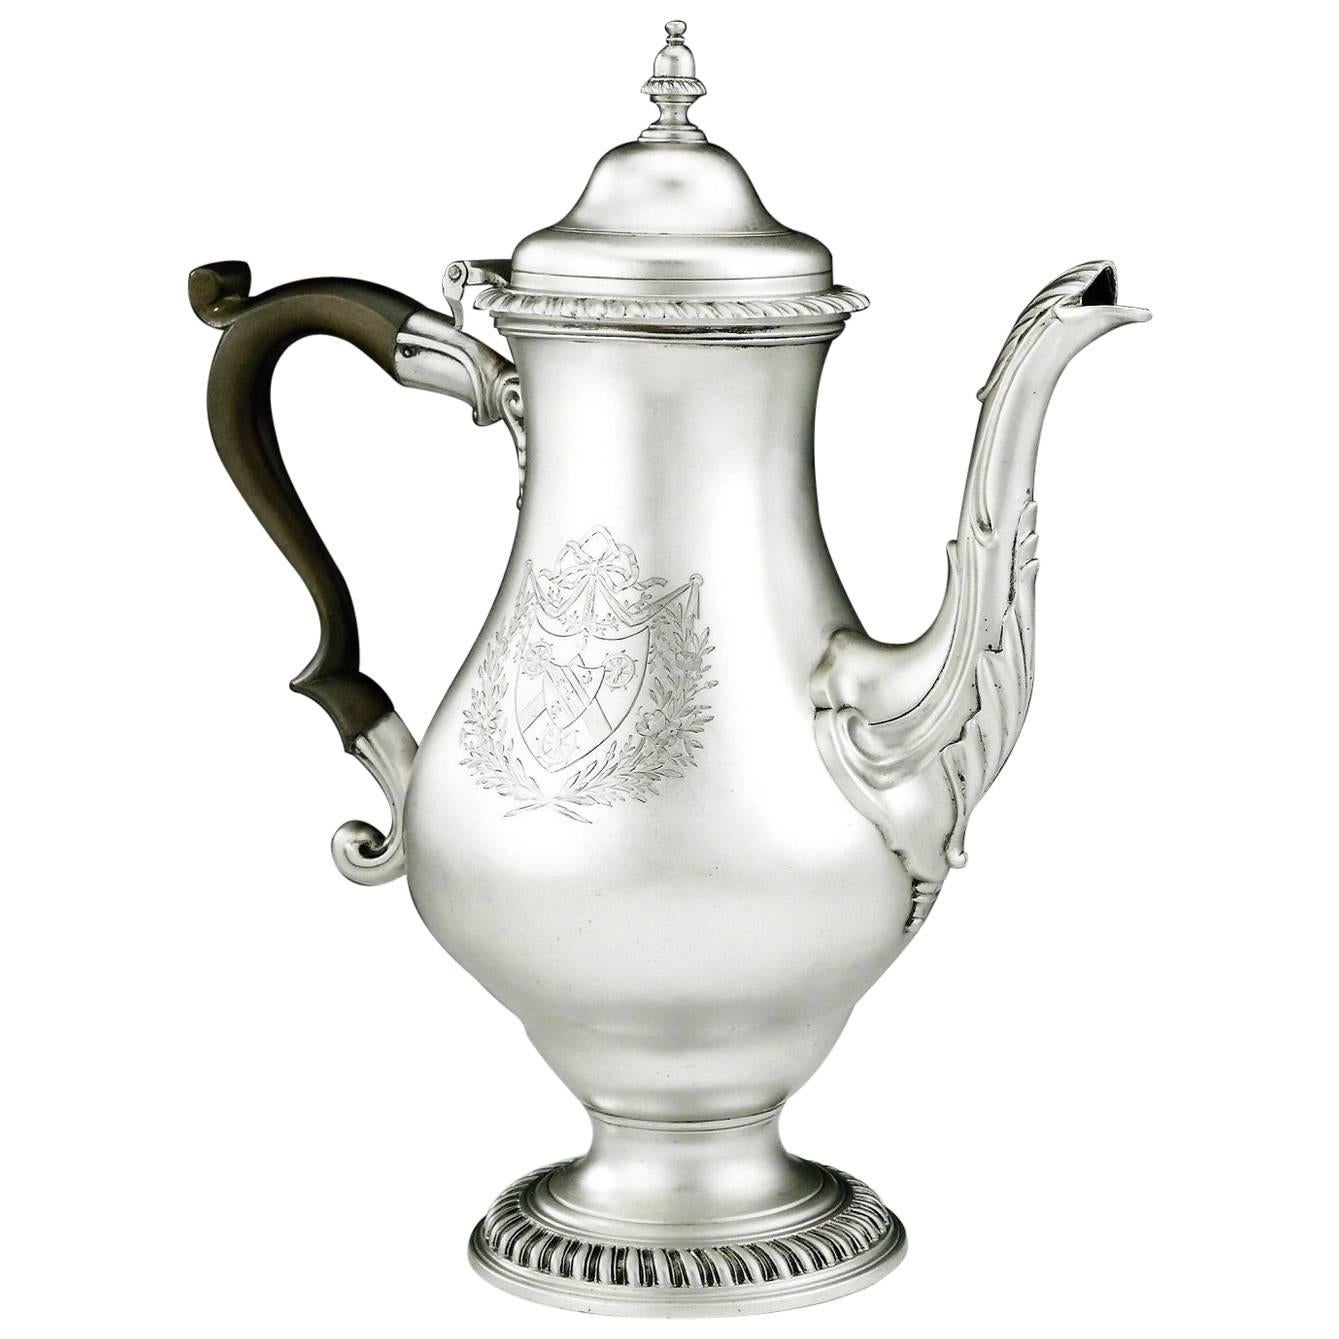 Extremely Fine George III Coffee Pot Made in London in 1772 by John Deacon For Sale